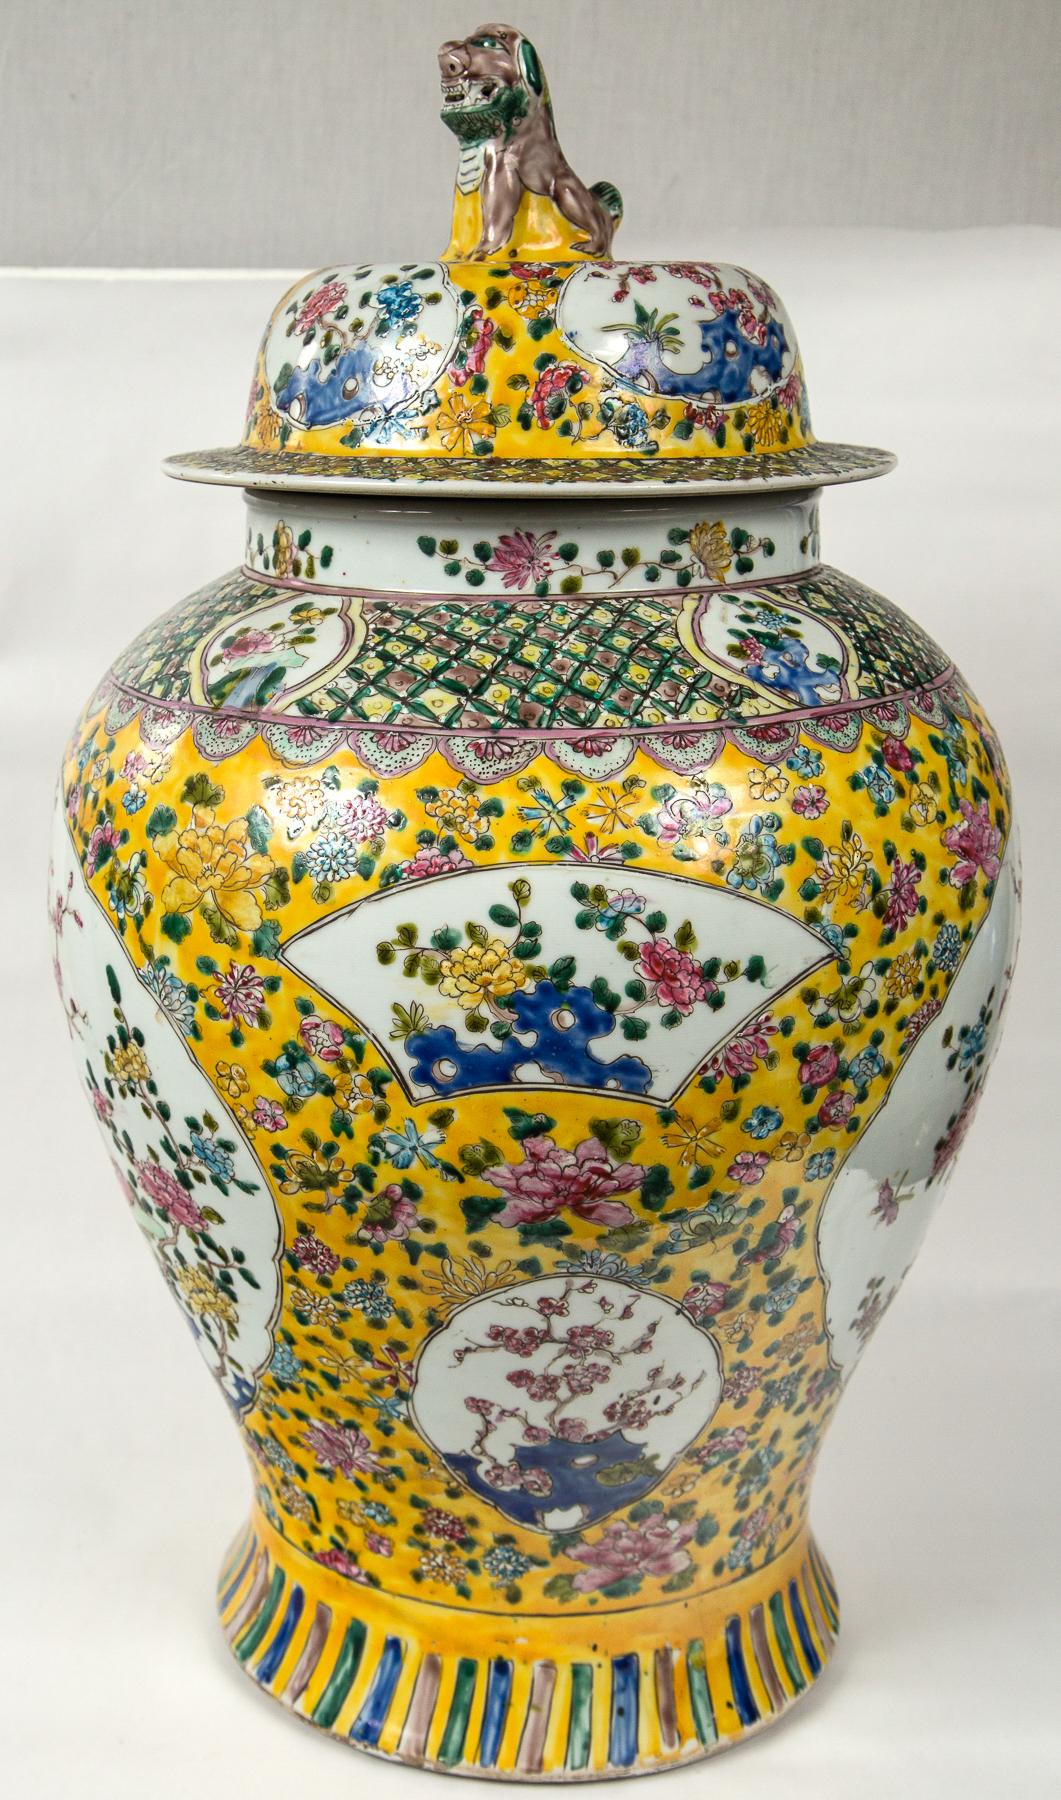 Yellow ground, hand painted patterns and designs
foo dog form finial atop lids.